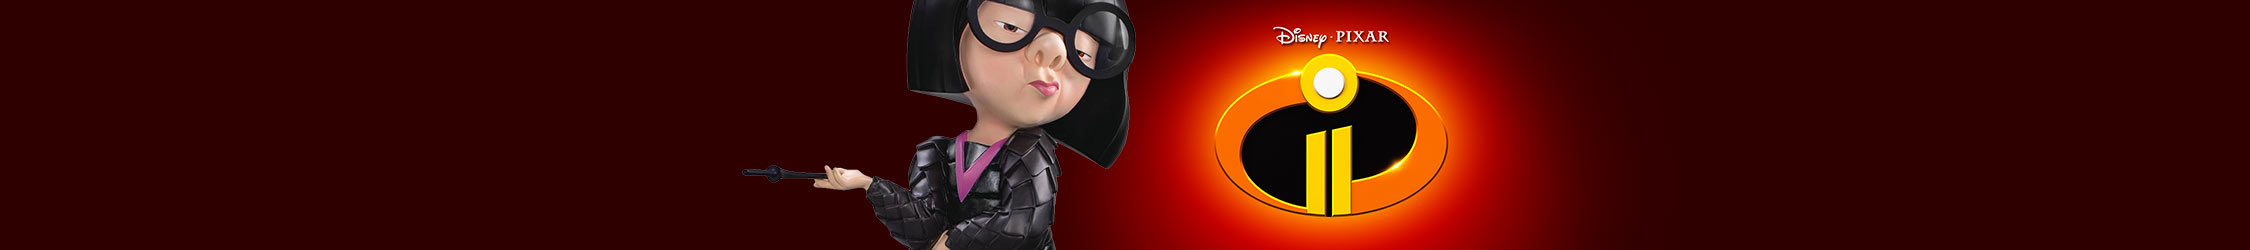 The Incredibles Toys, Action Figures, & Collectibles